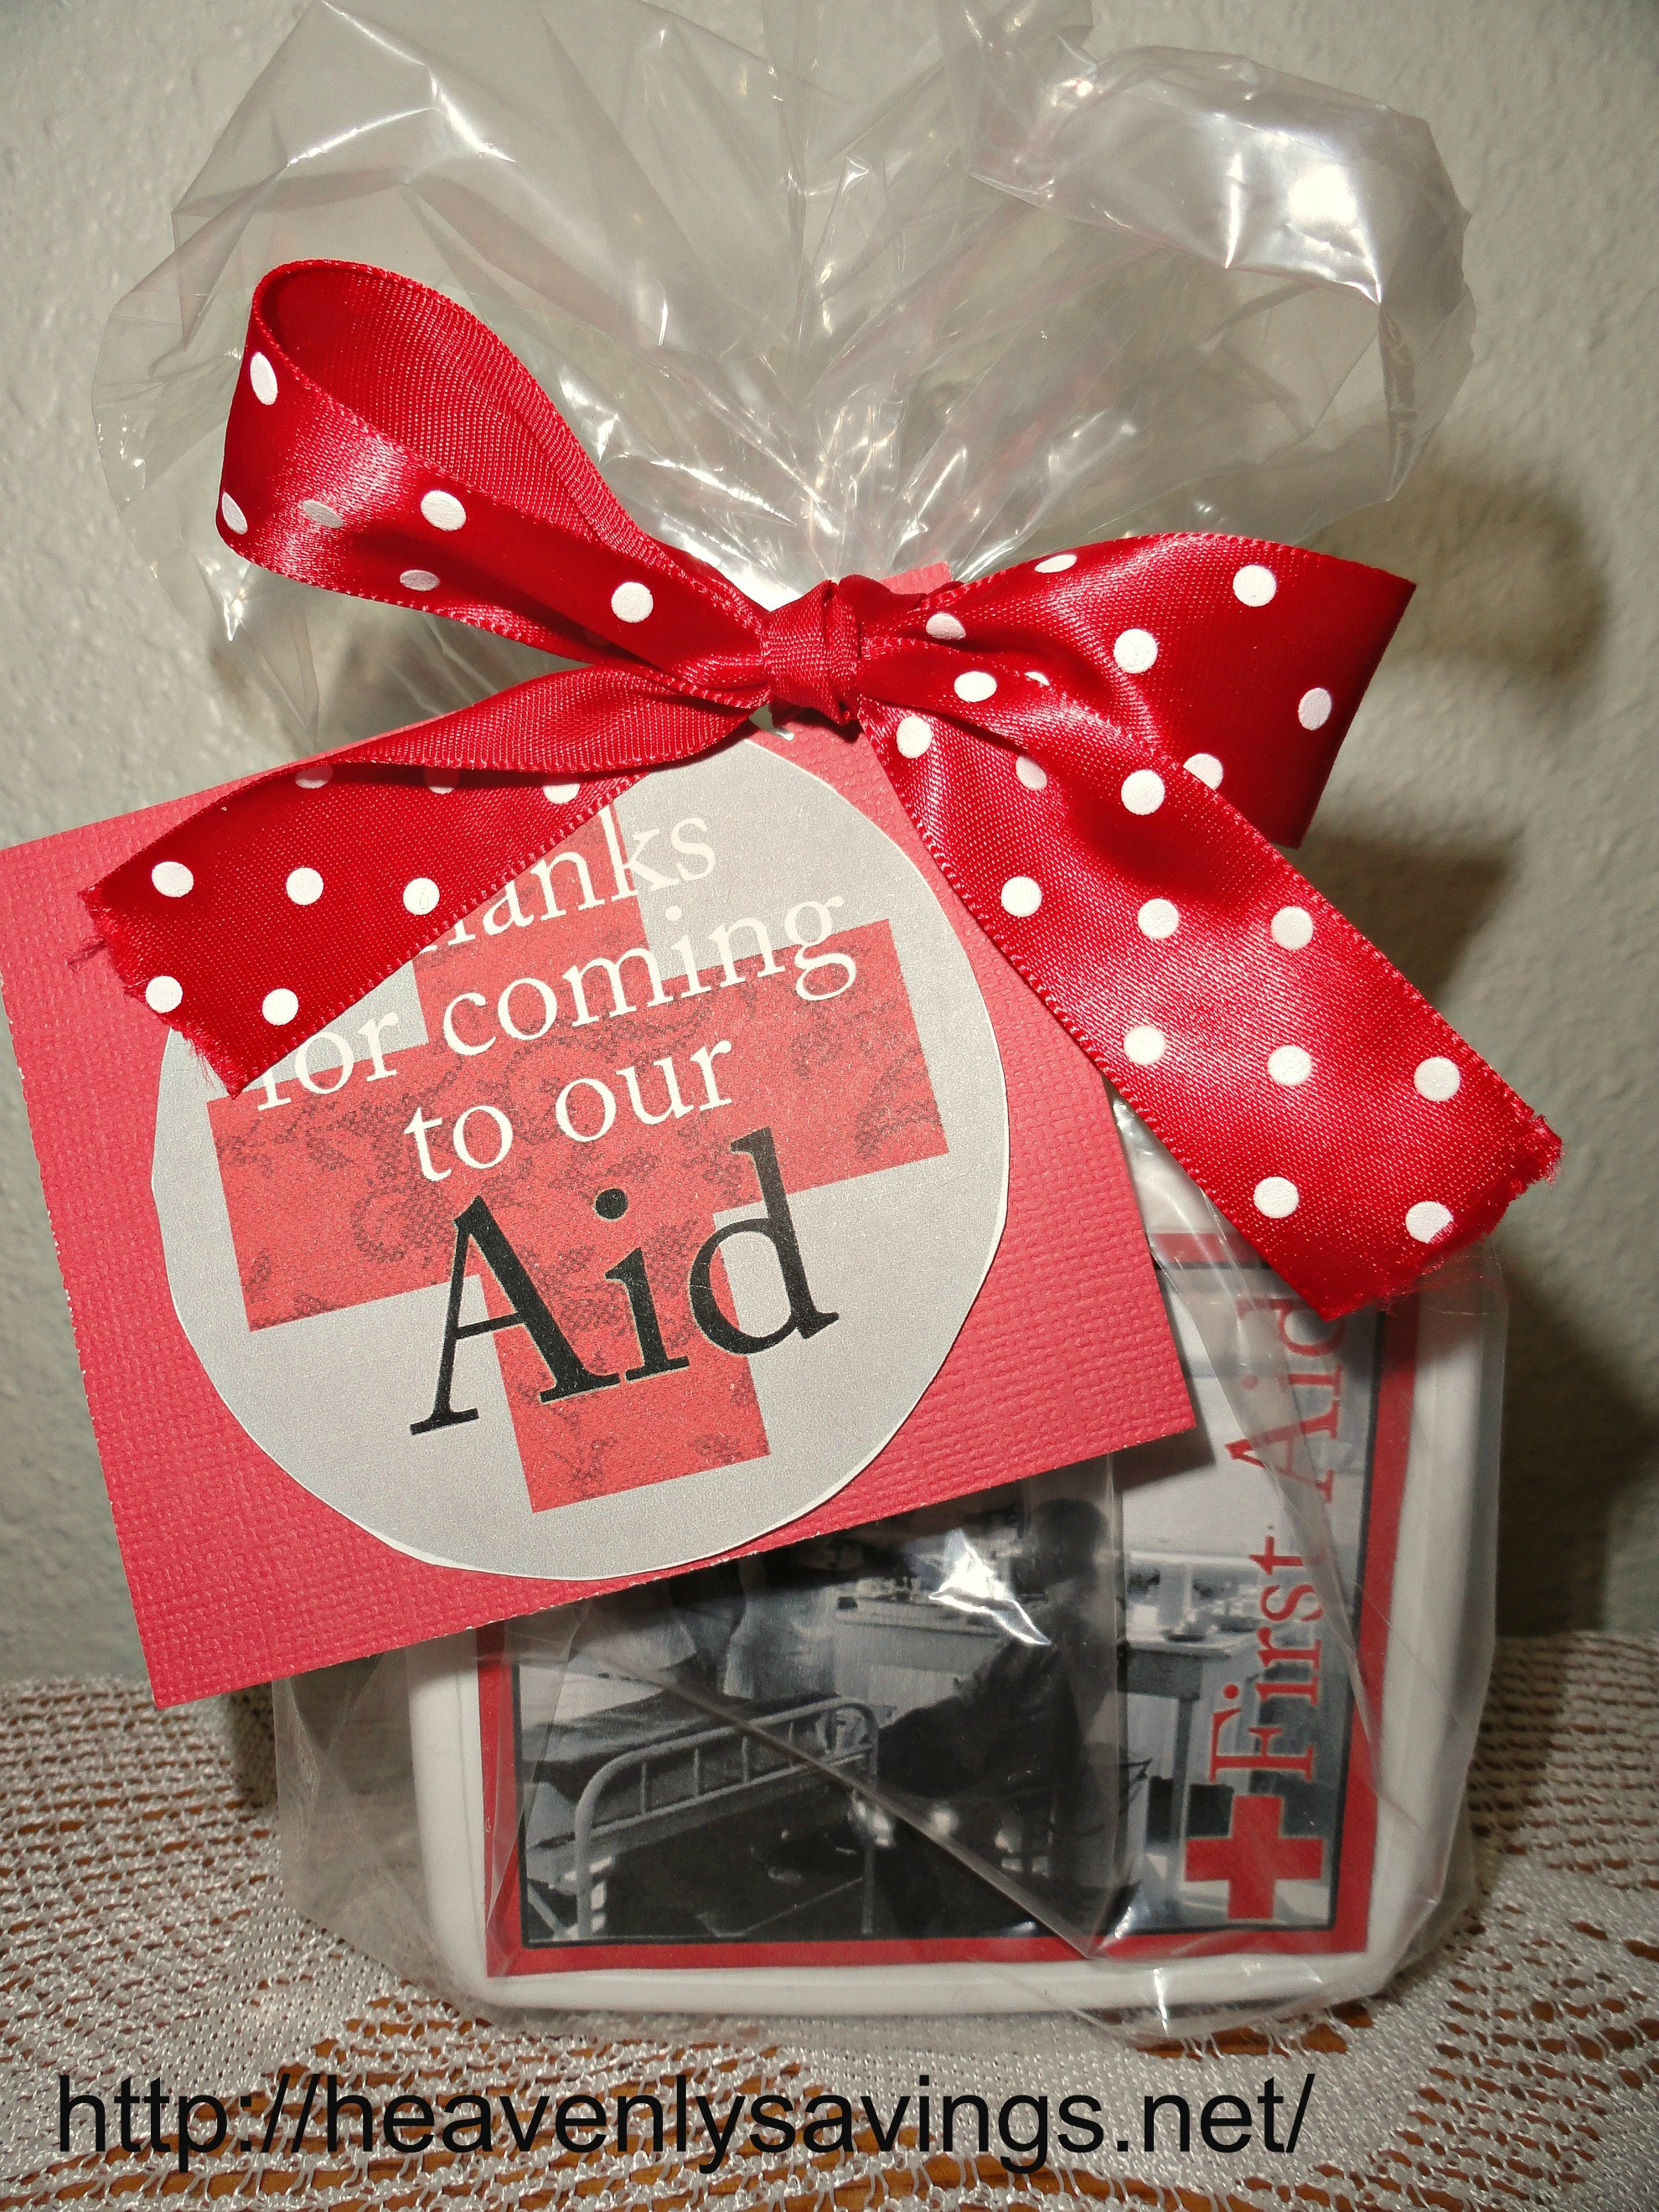 Inexpensive Thank You Gift Ideas
 Cheap and Easy Thank You Gift